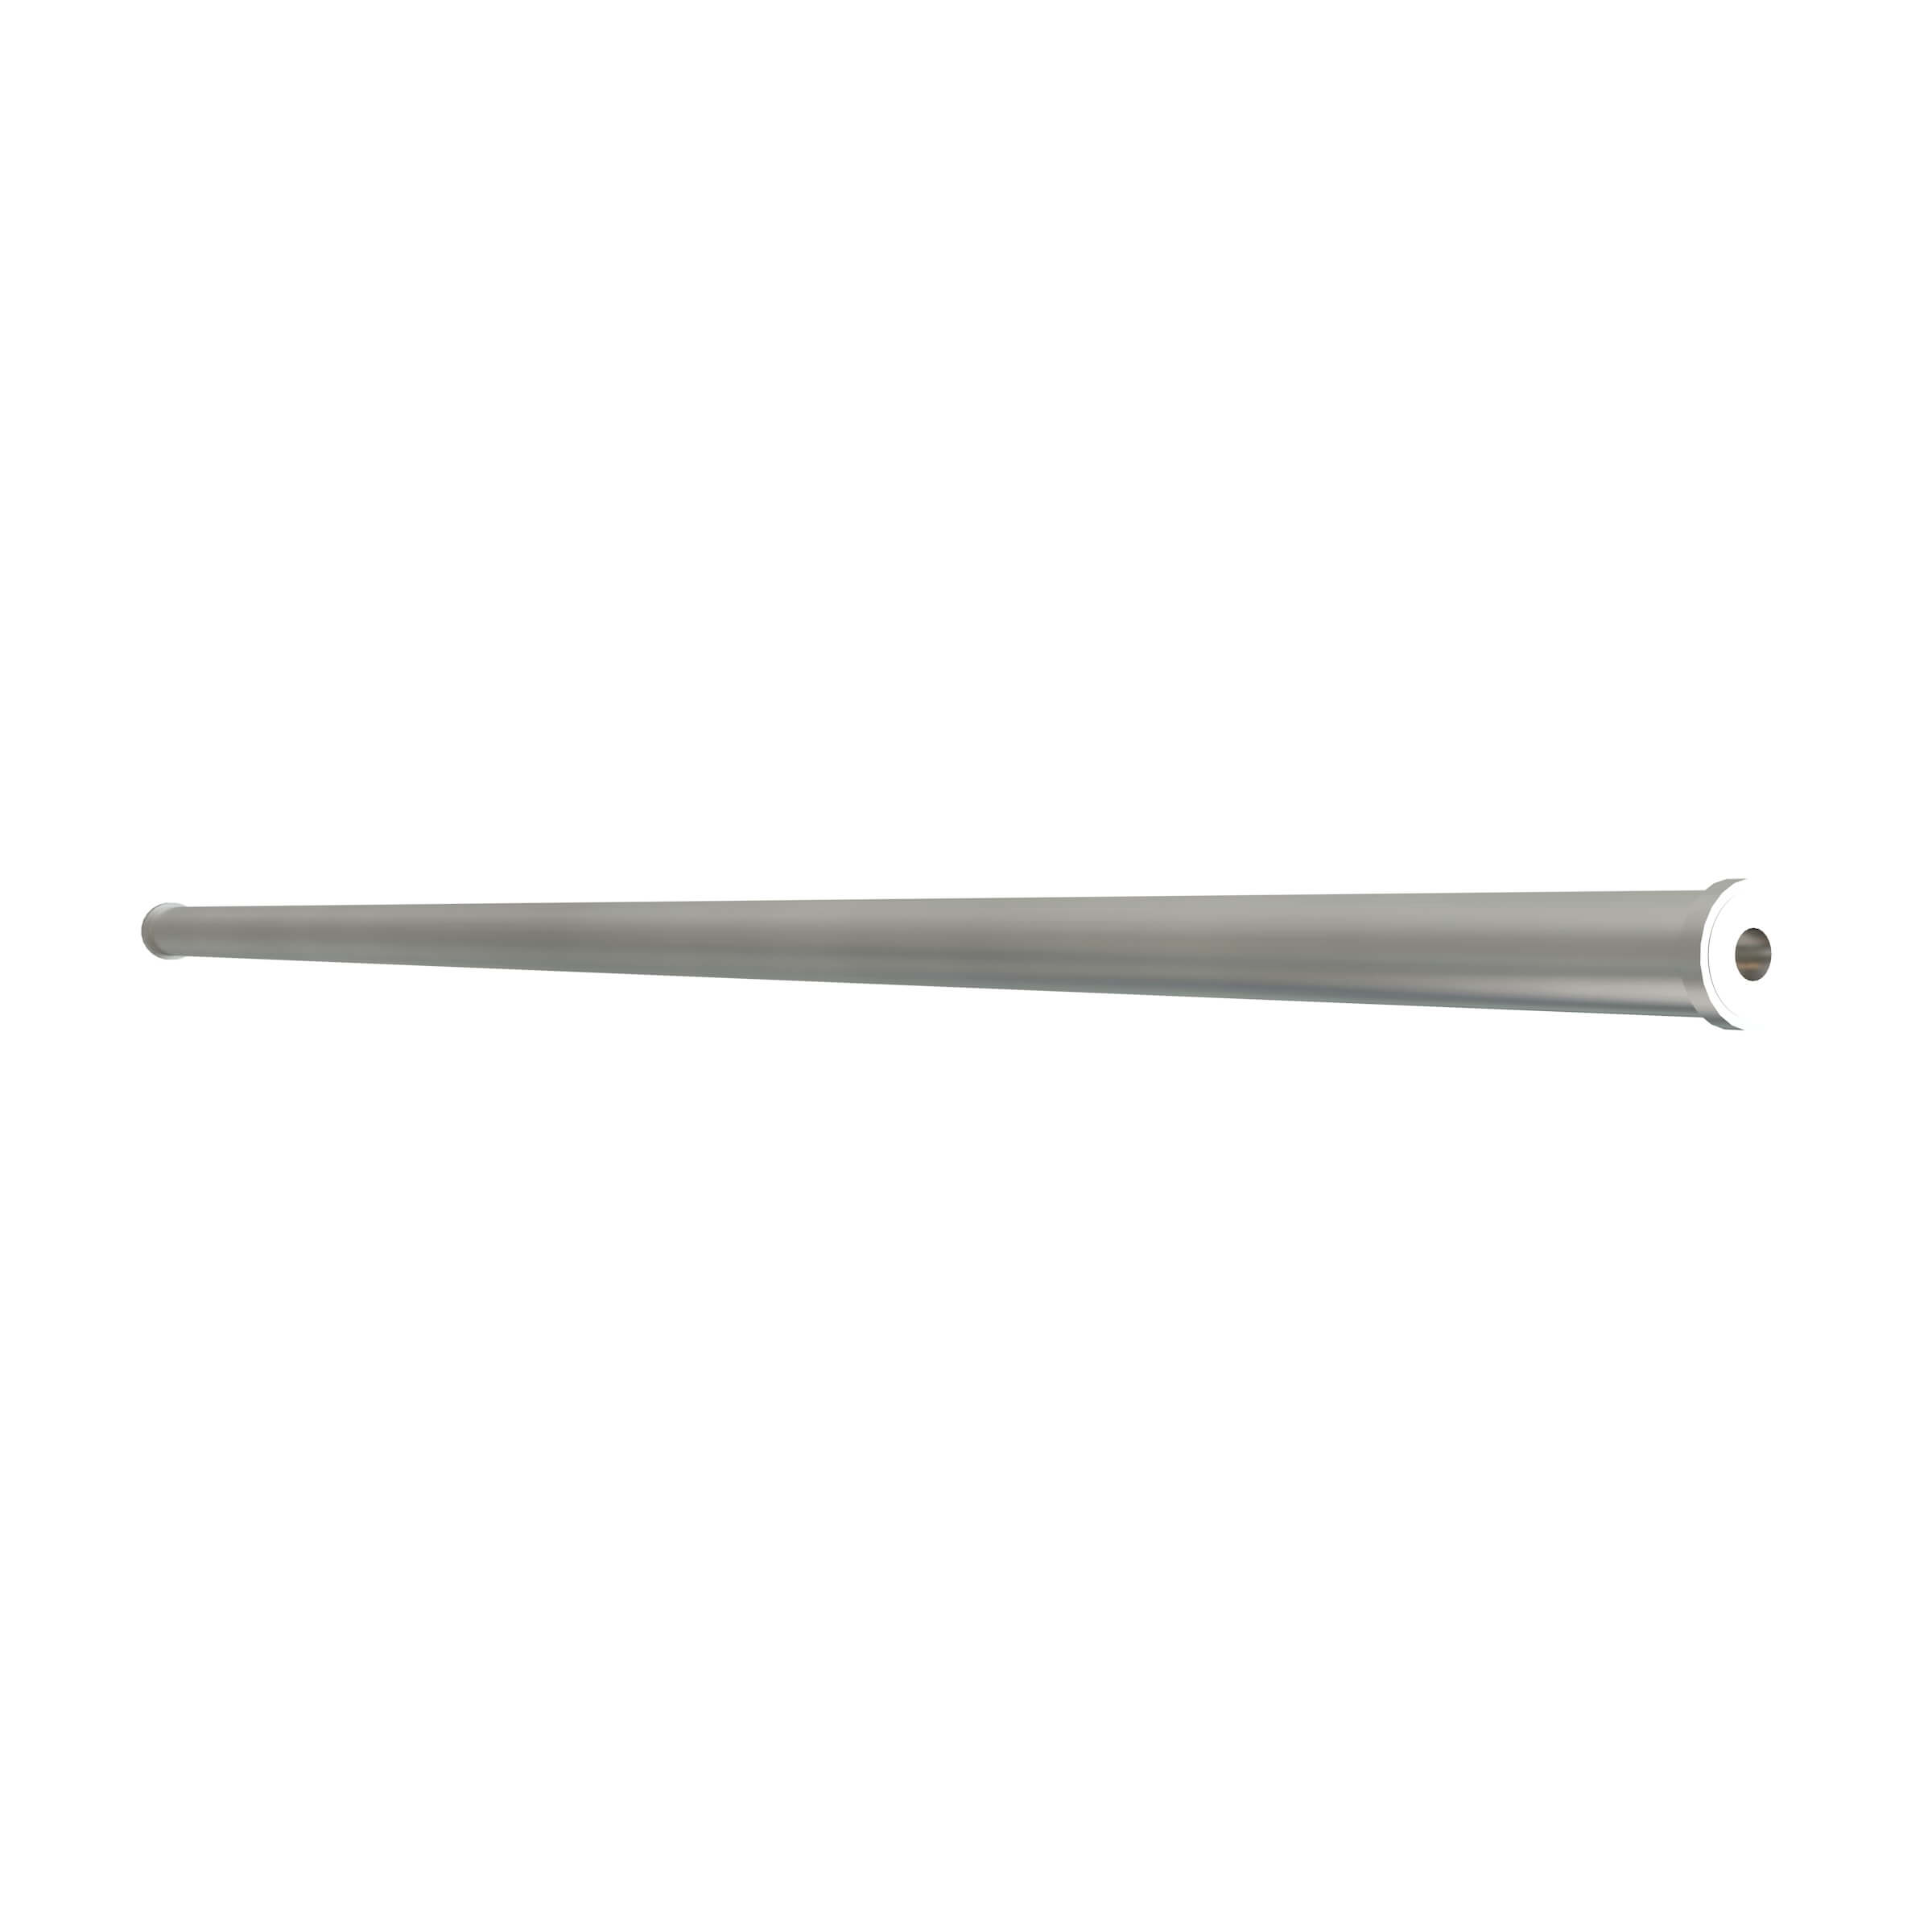 Gymnastic bar V2A stainless steel 140cm with M12 central thread